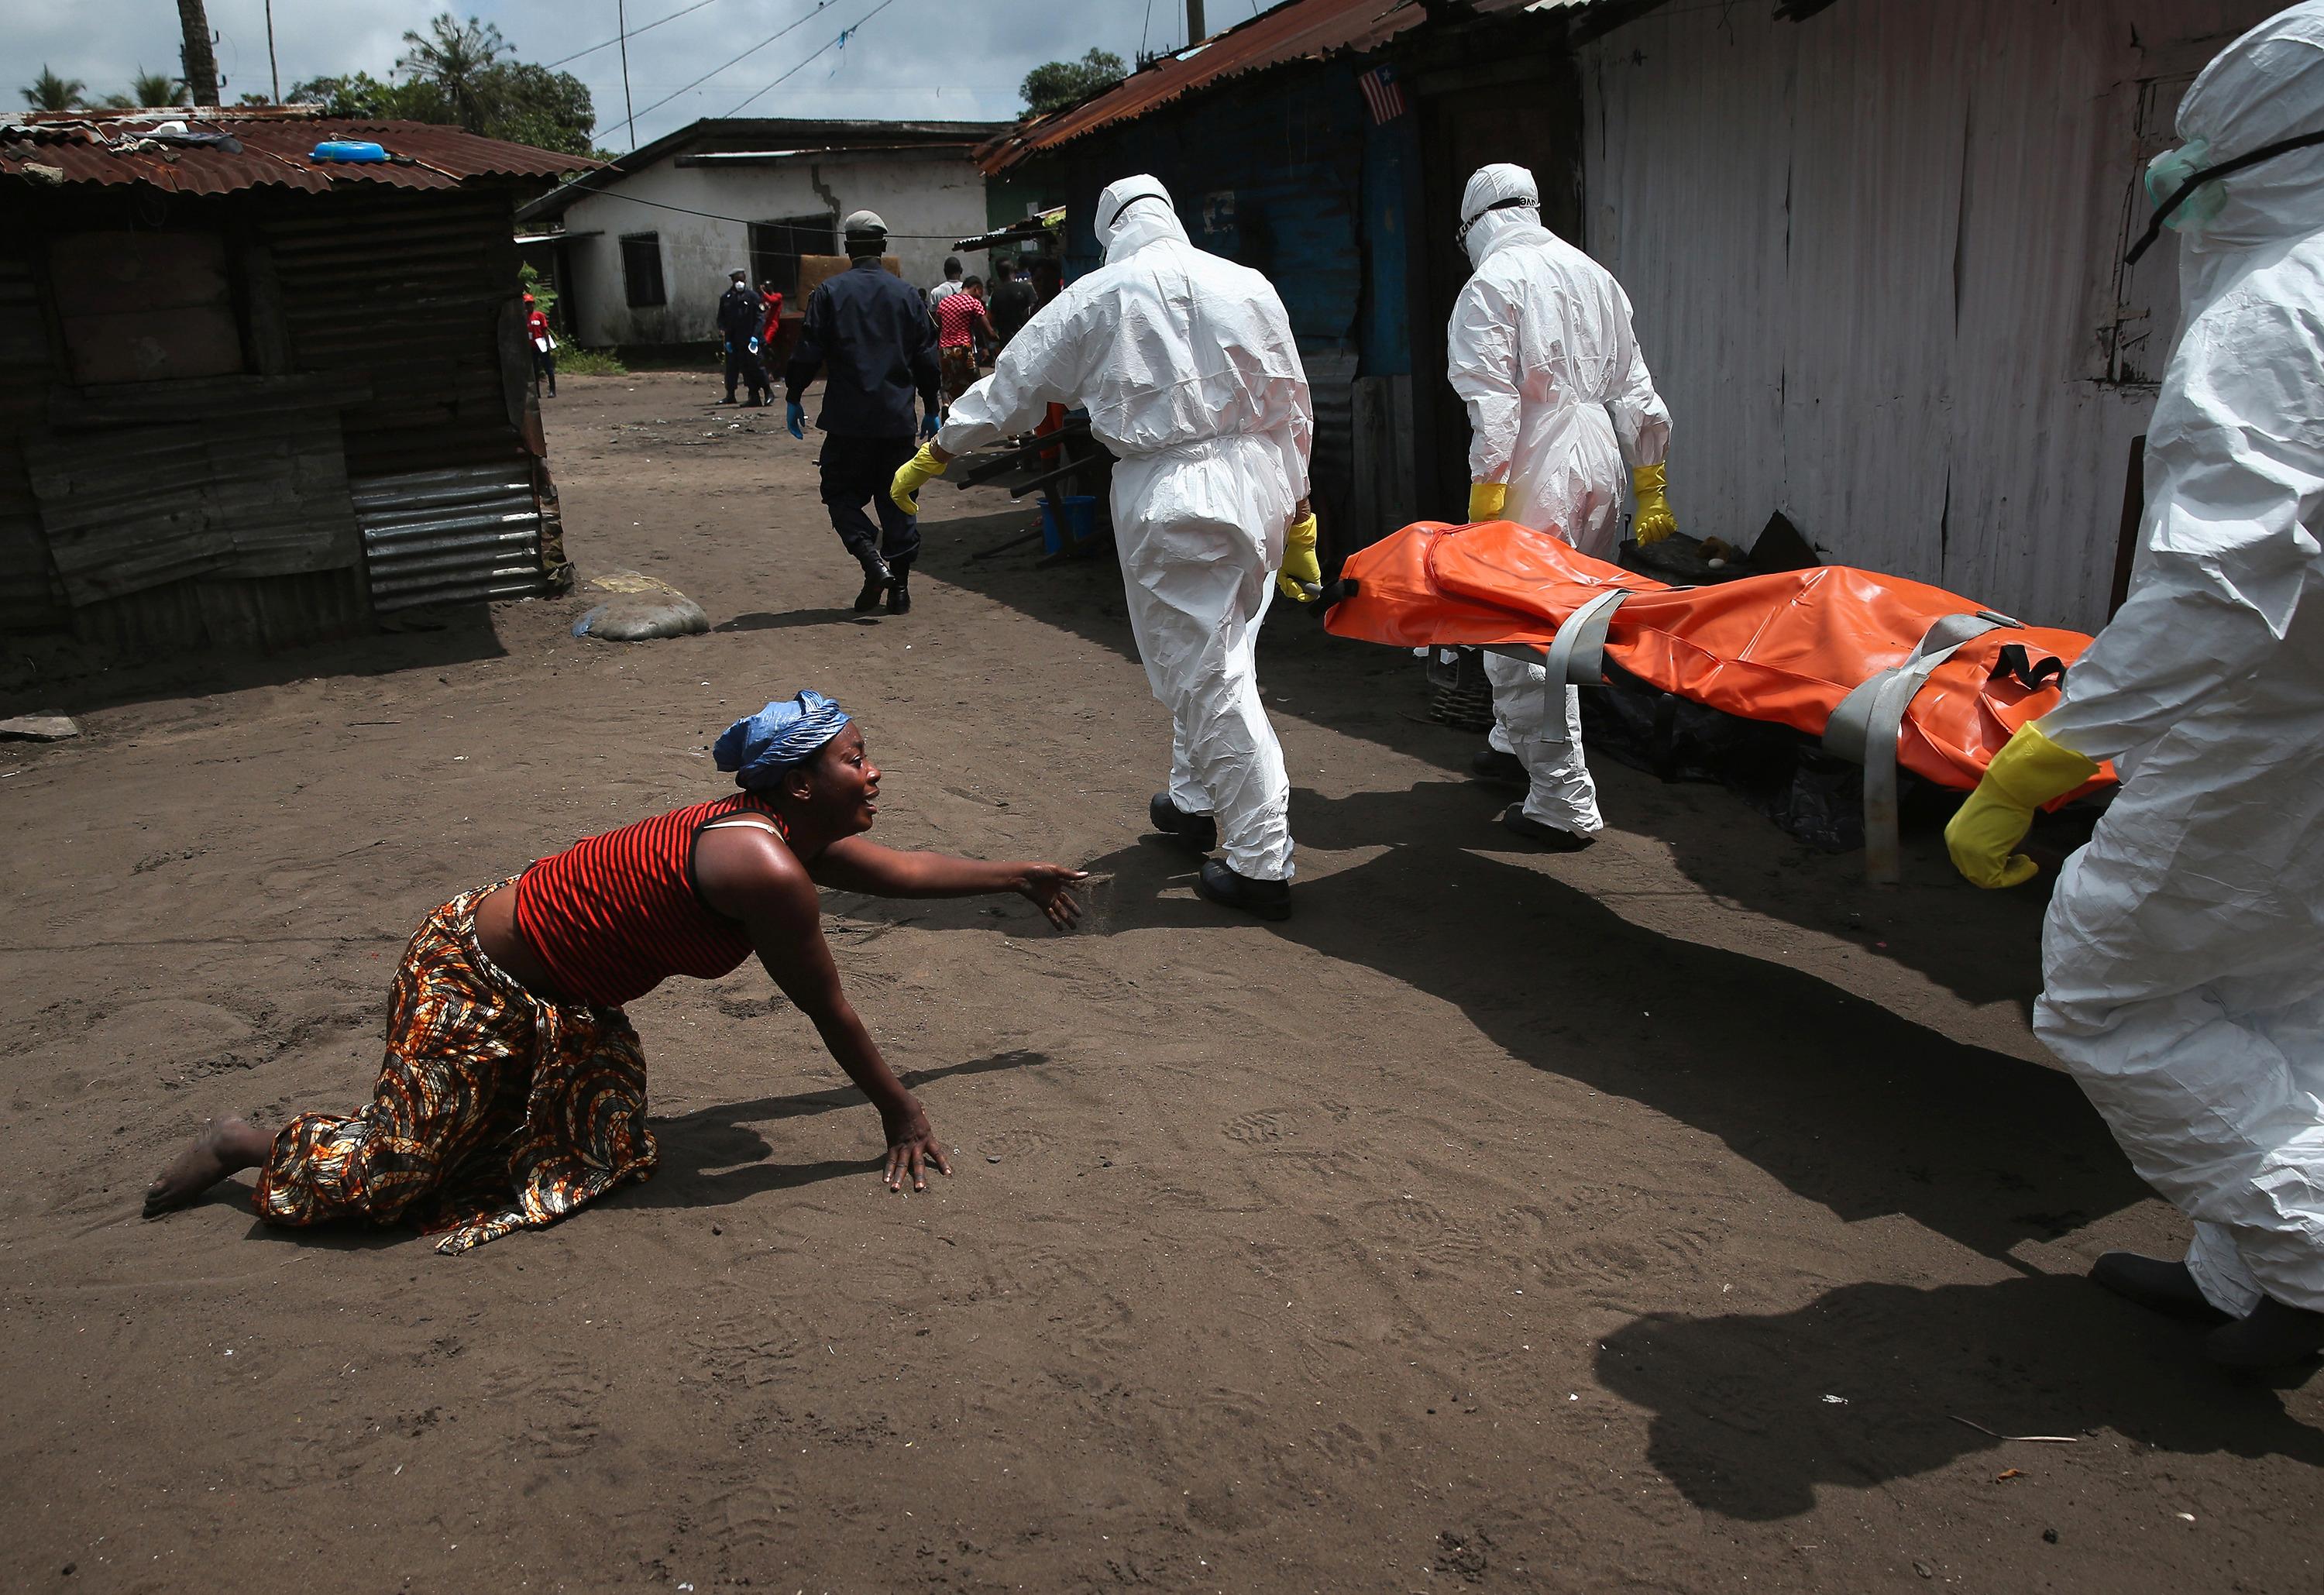 A woman crawls towards the body of her sister as Ebola burial team members take her for cremation on October 10, 2014 in Monrovia, Liberia. The woman had died outside her home earlier in the morning while trying to walk to a treatment center, according to her relatives. The burial of loved ones is important in Liberian culture, making the removal of infected bodies for cremation all the more traumatic for surviving family members. Foto: John Moore / Getty Images, United States, Shortlist, Current Affairs, Professional Competition, 2015 Sony World Photography Awards